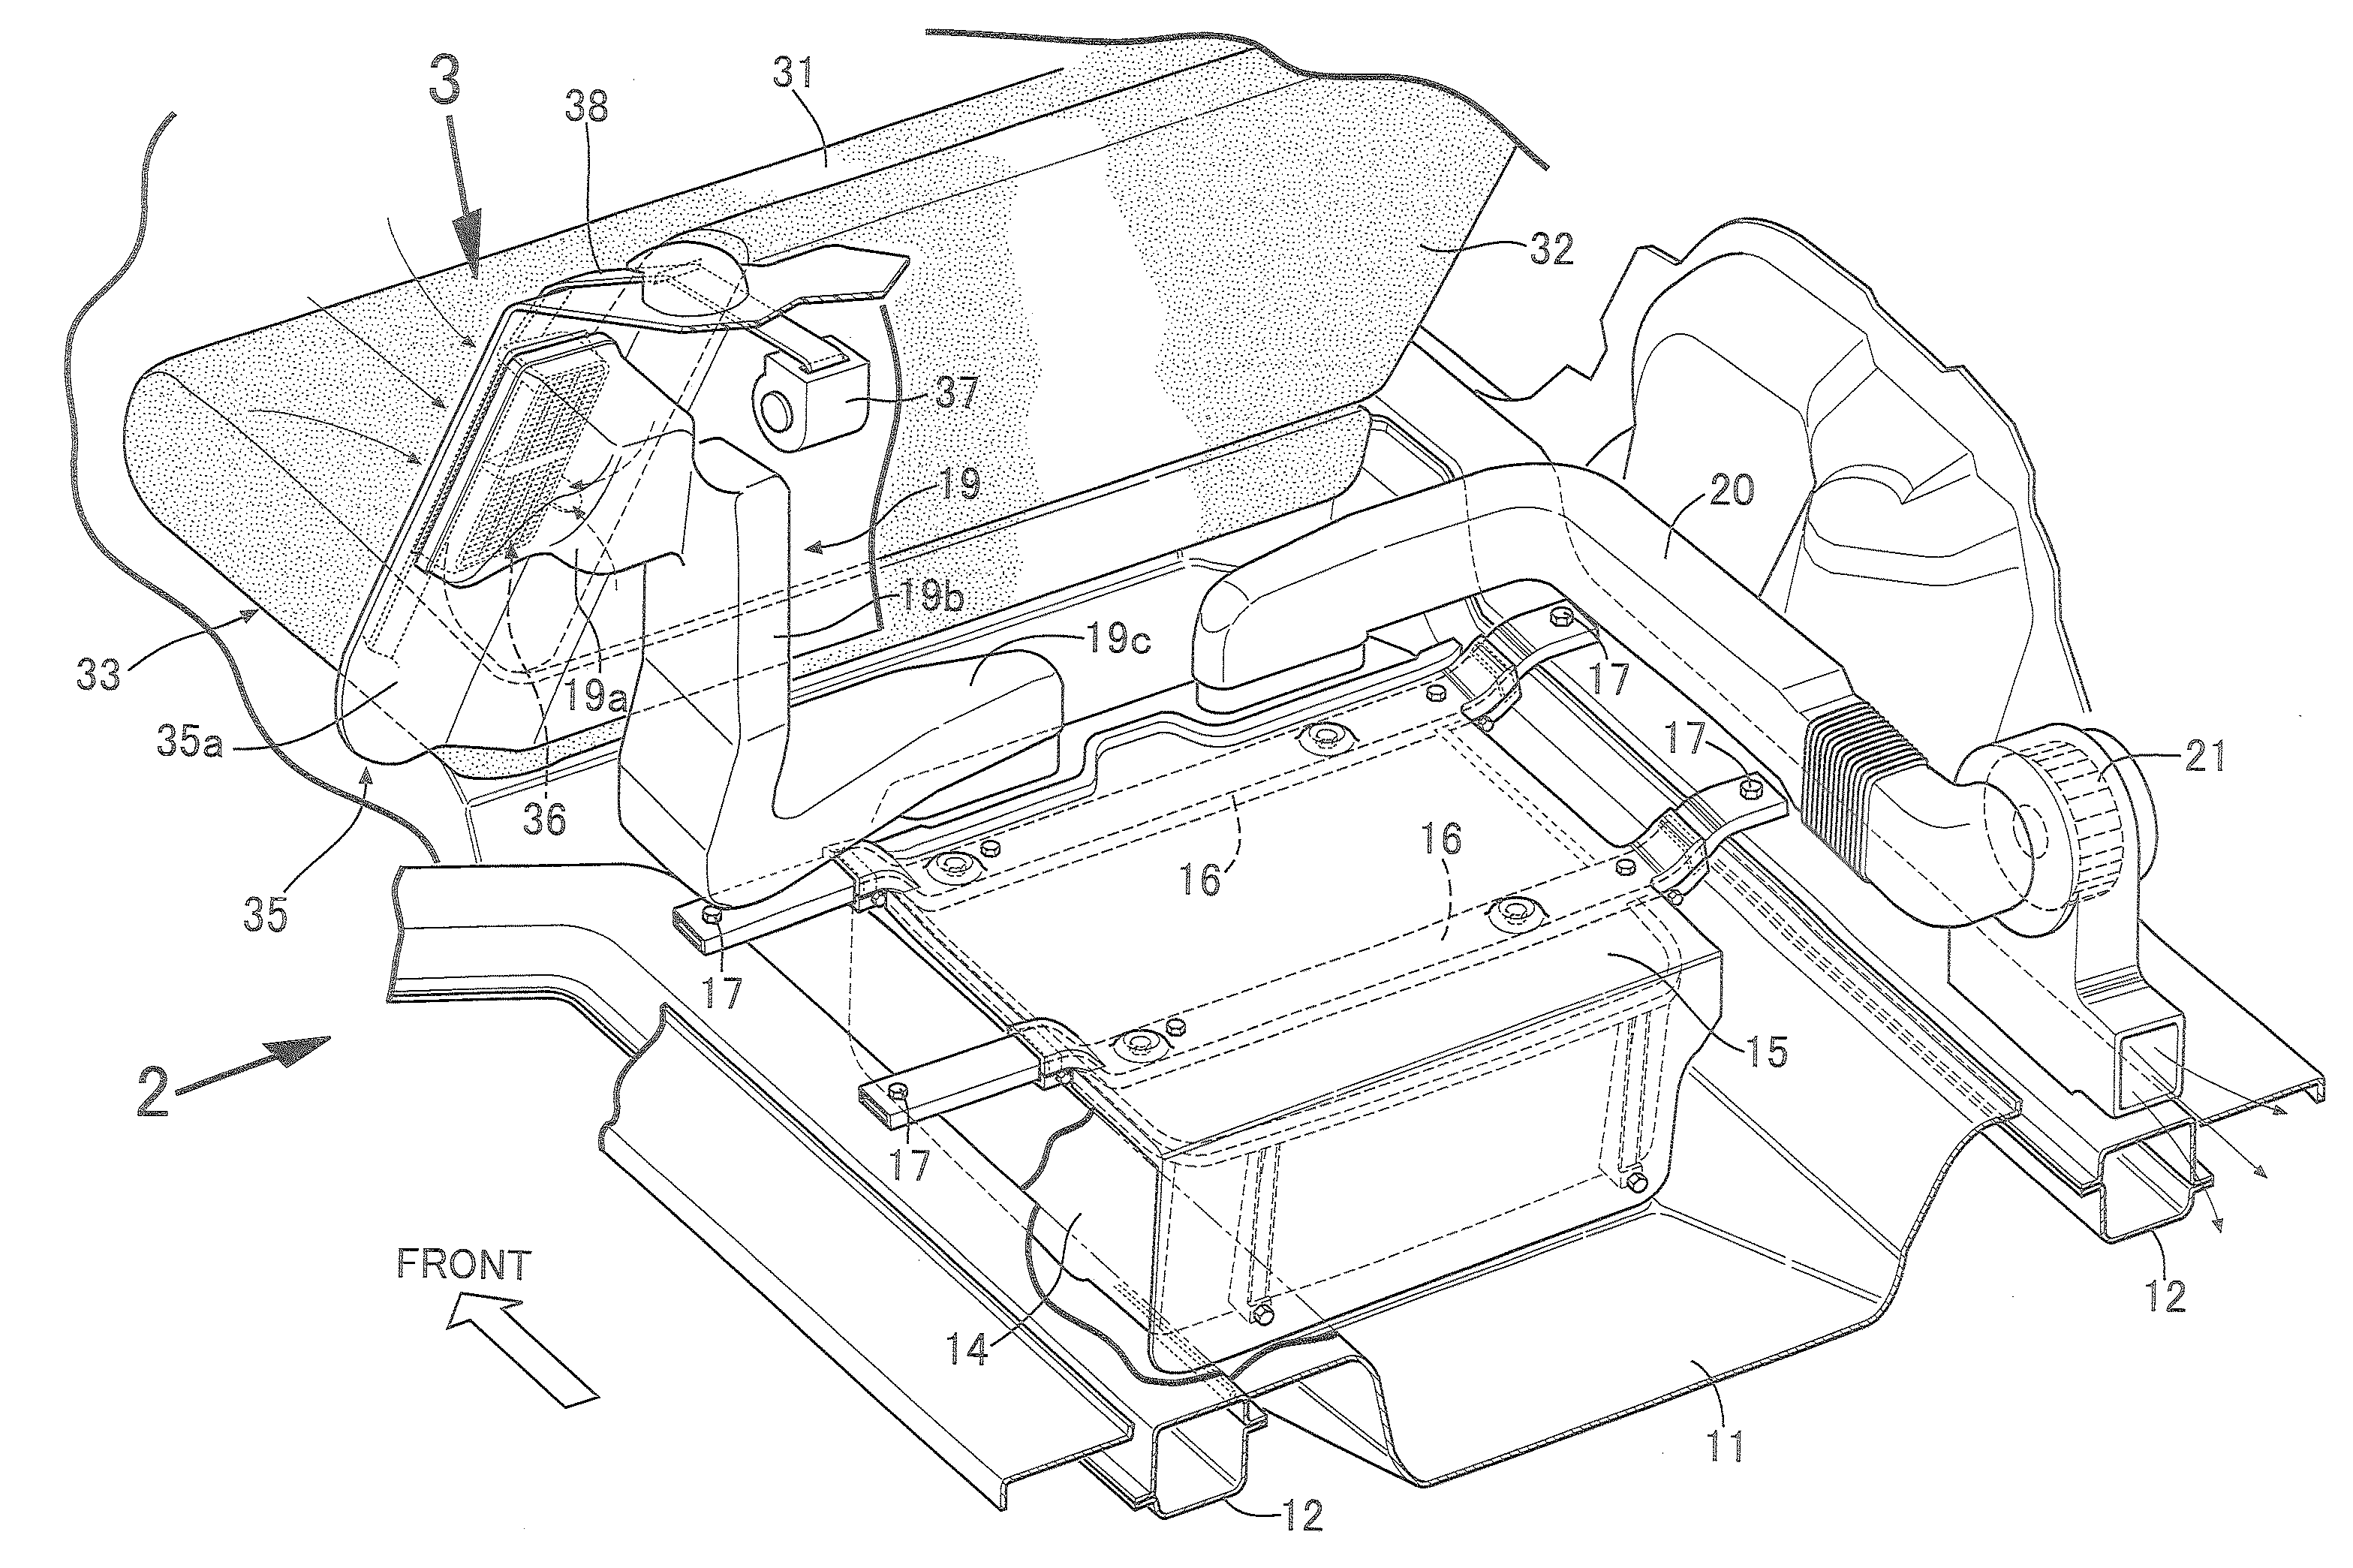 Battery cooling air intake structure